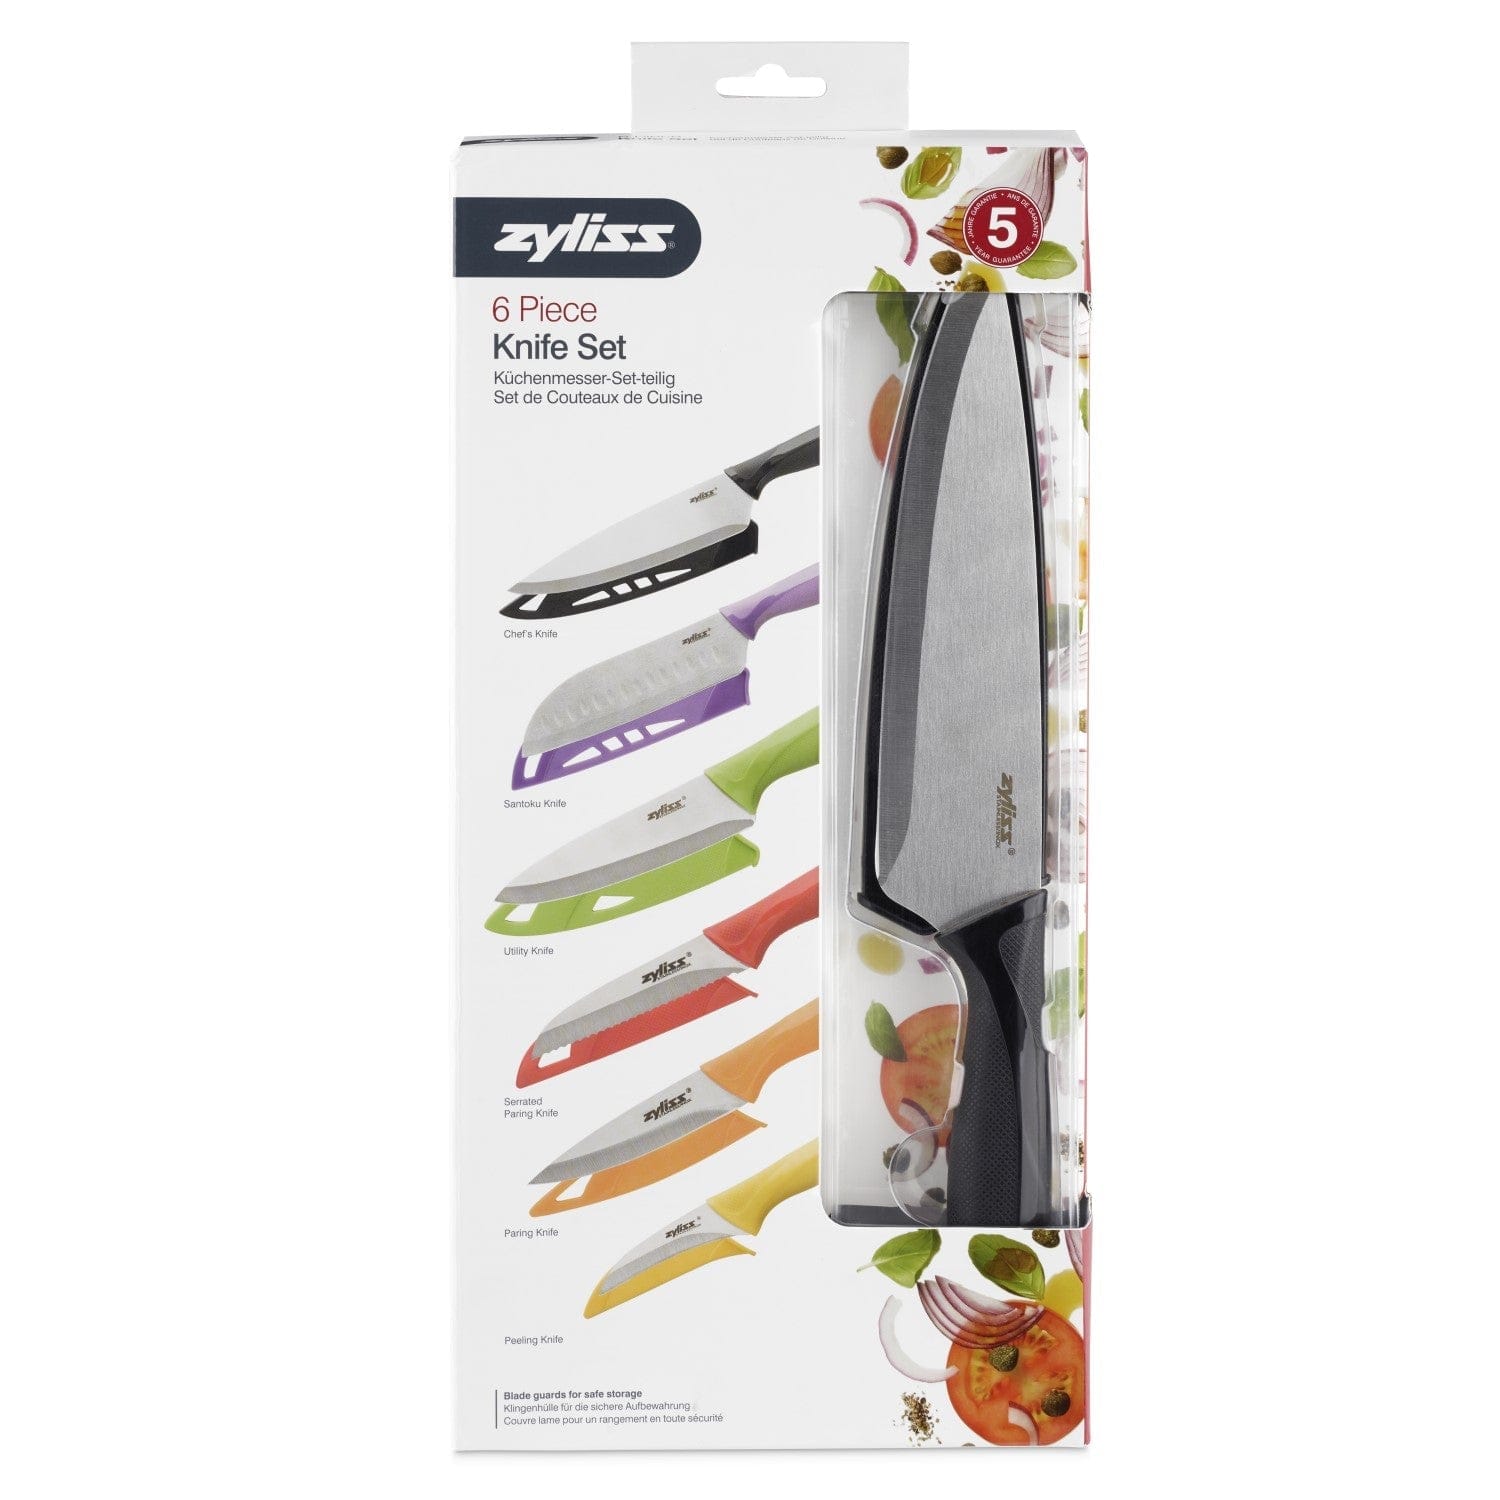 6 Piece Kitchen Knife Value Set with Sheath Covers